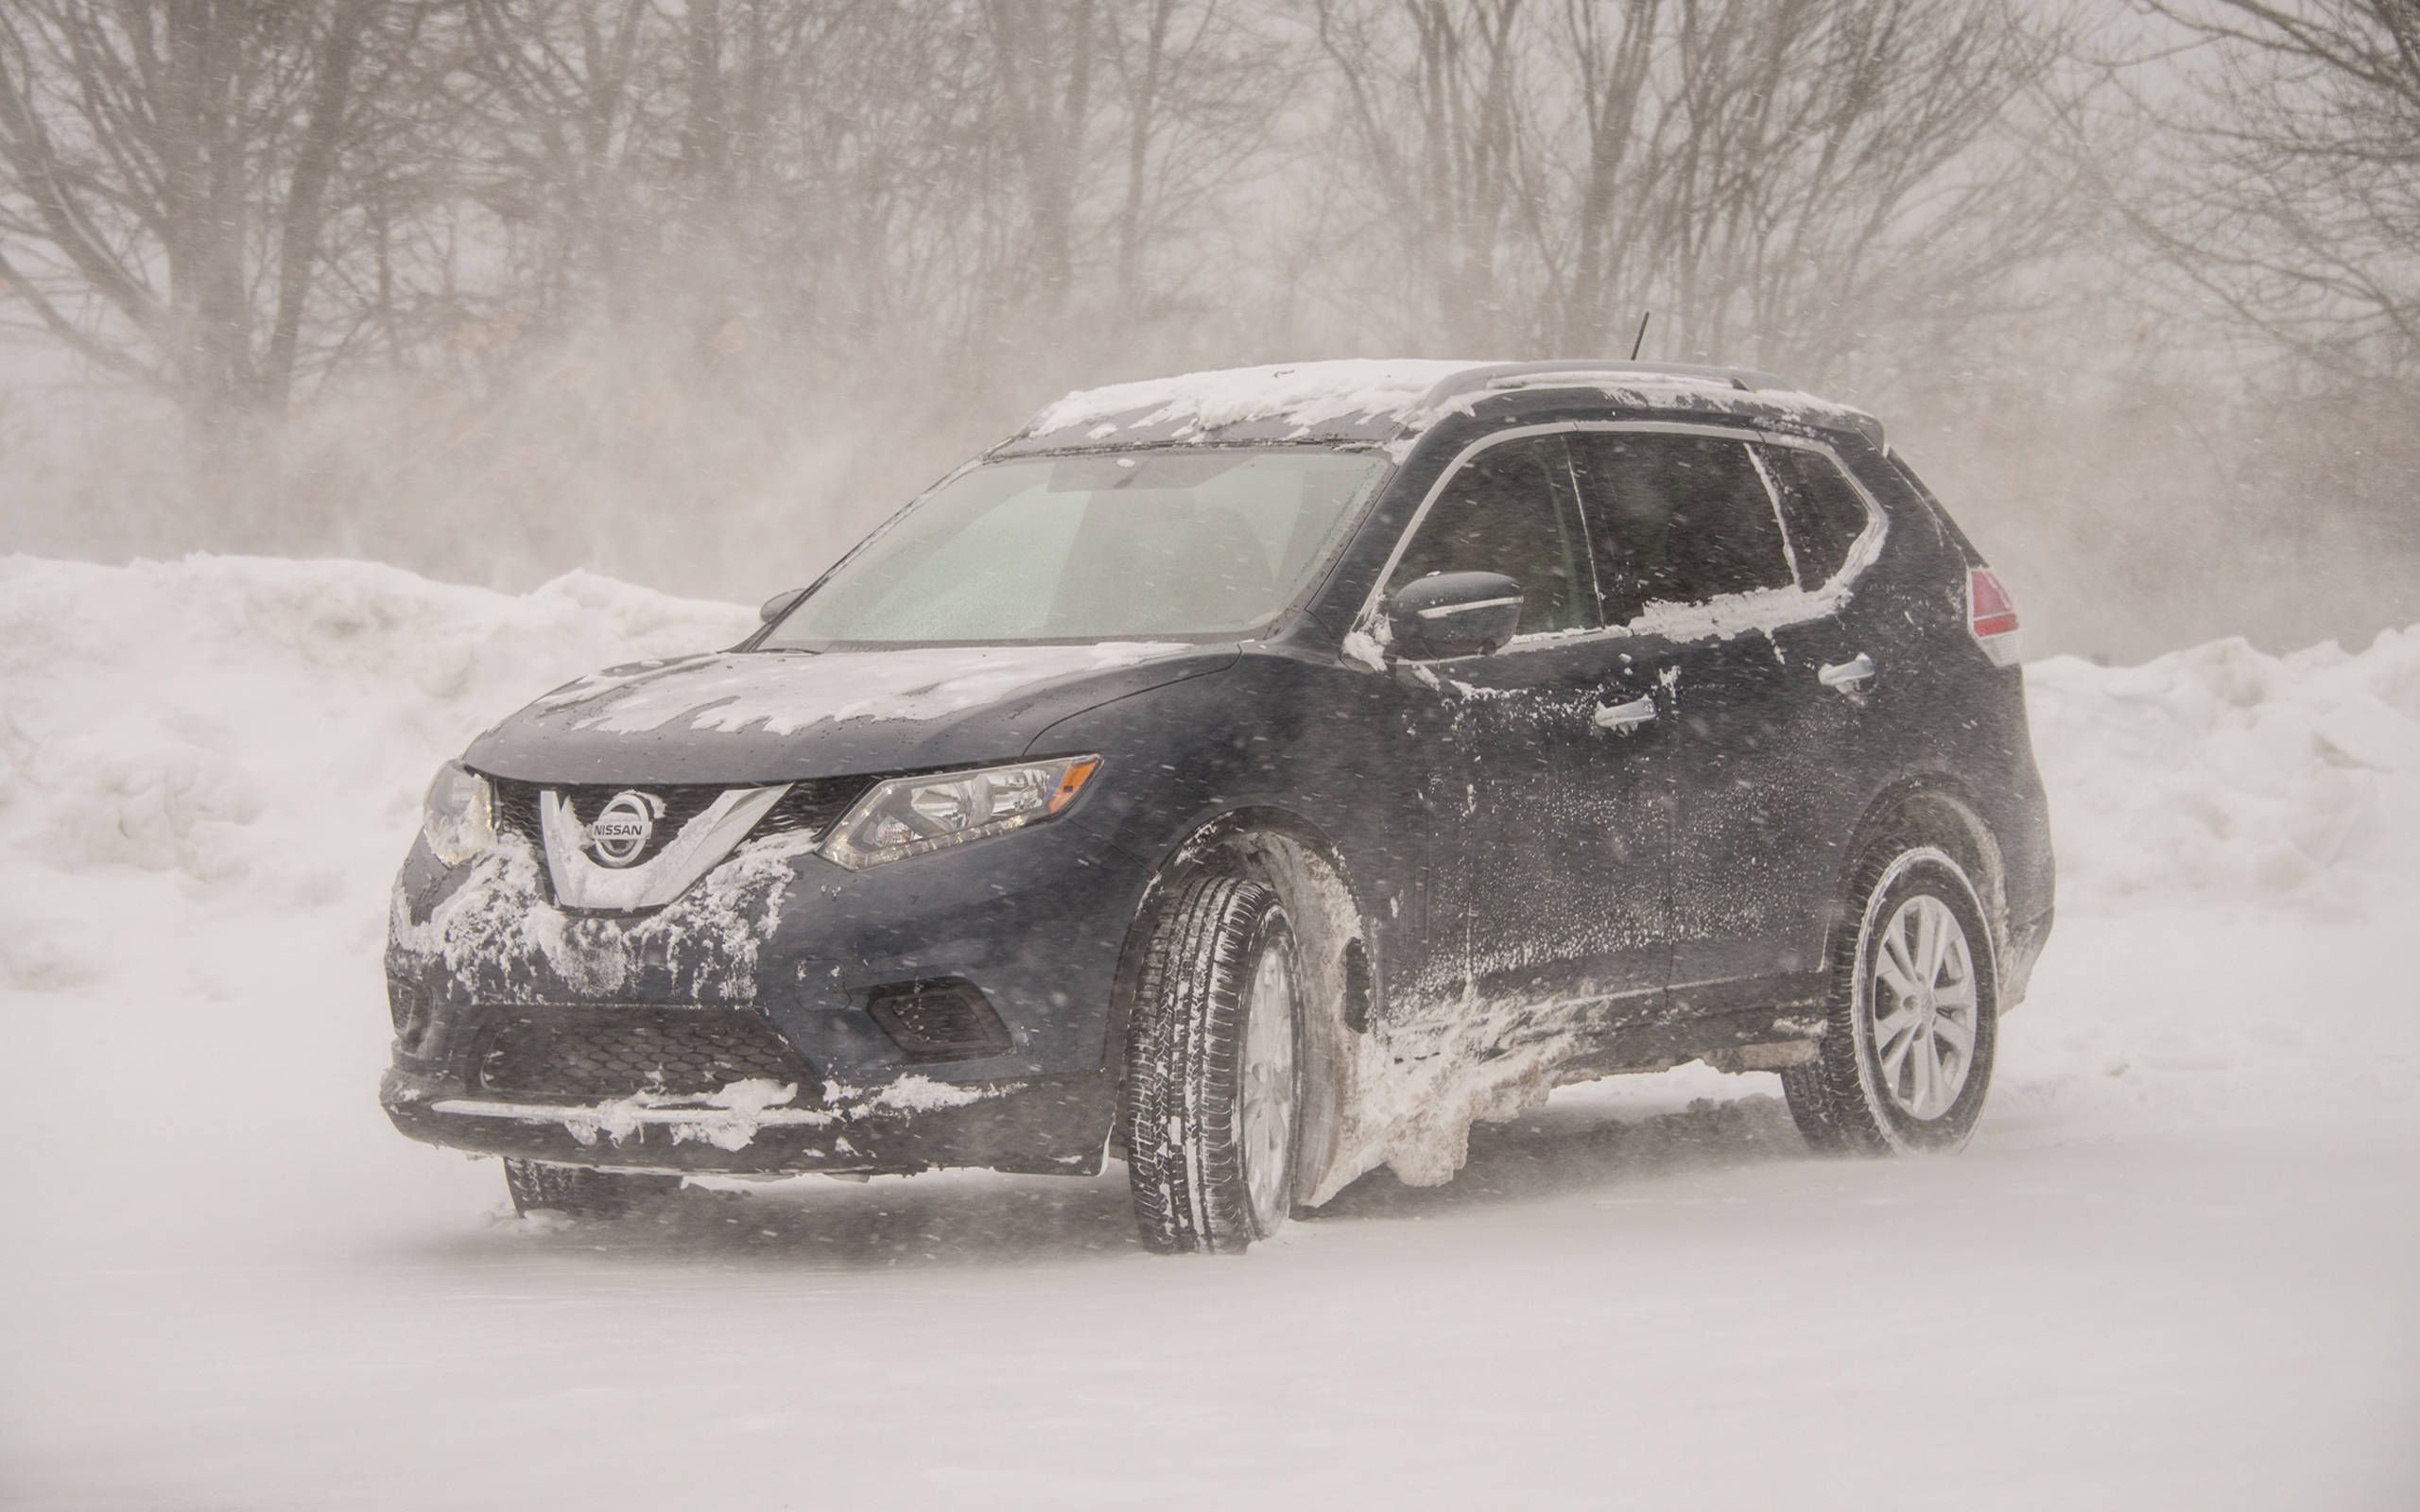 2015 Nissan Rogue SV AWD snowpocalypse drive review